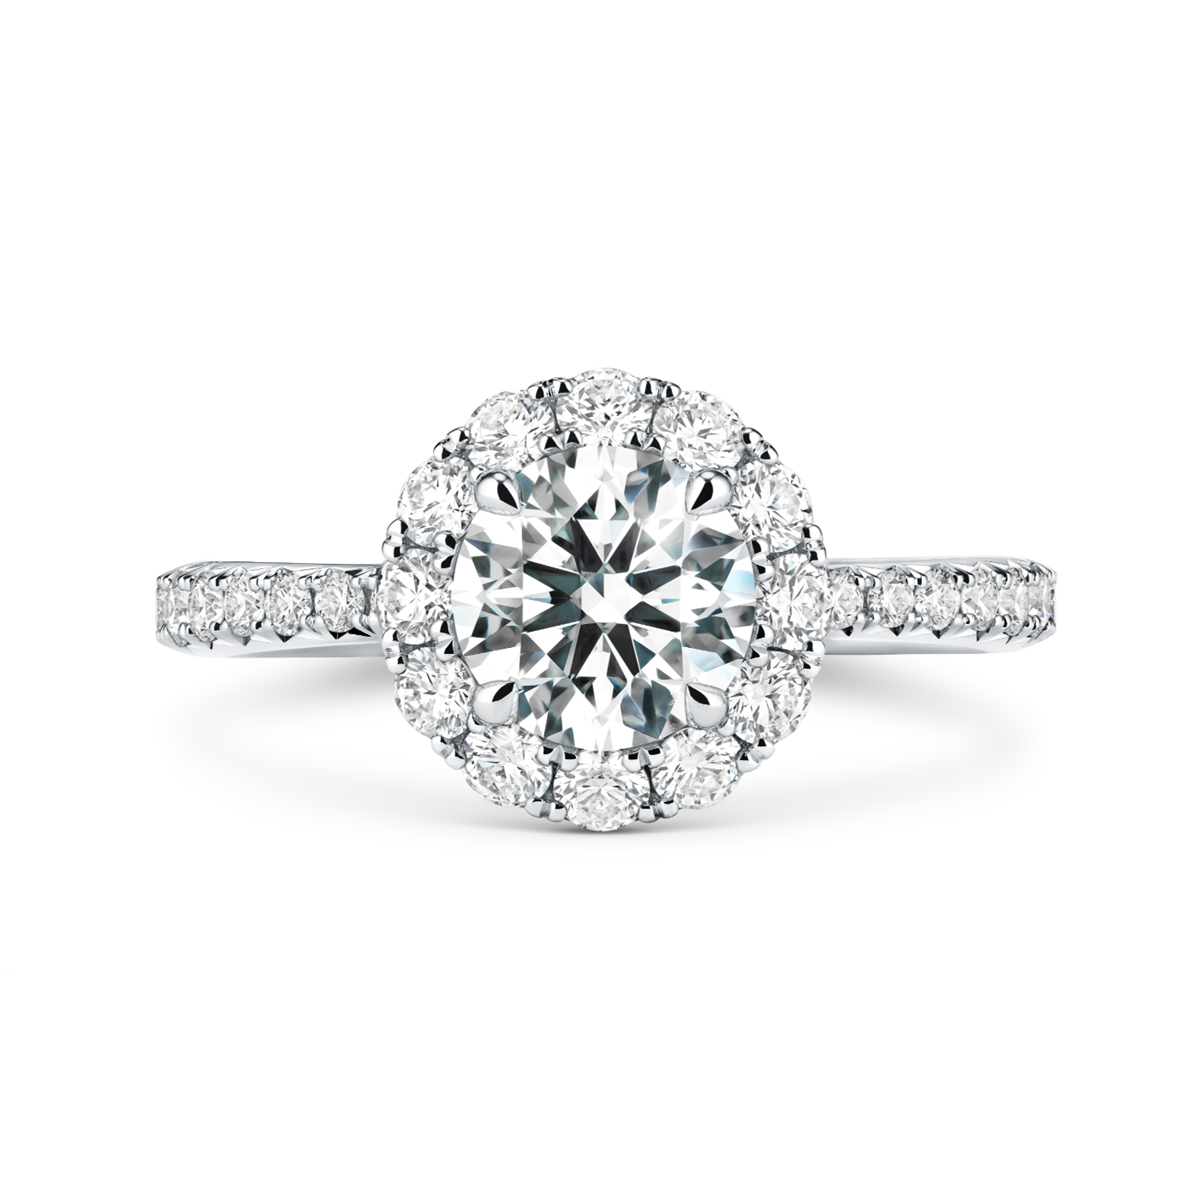 Hearts on fire engagement ring